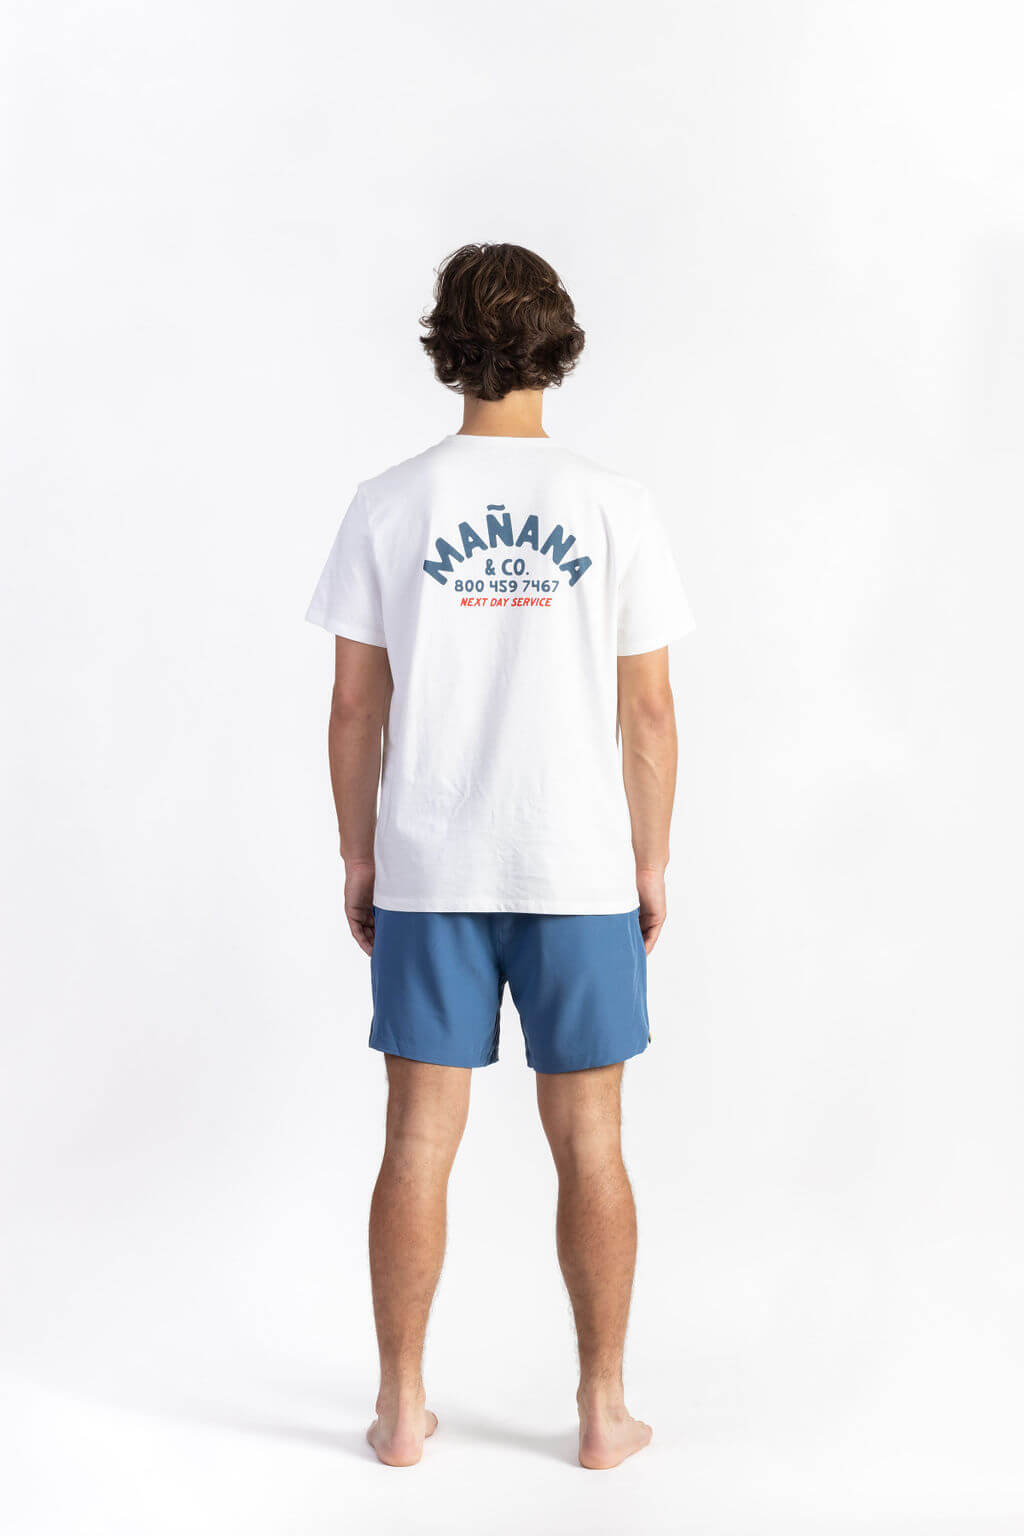 A man wearing a White Shop Tee having Manana branding with blue shorts